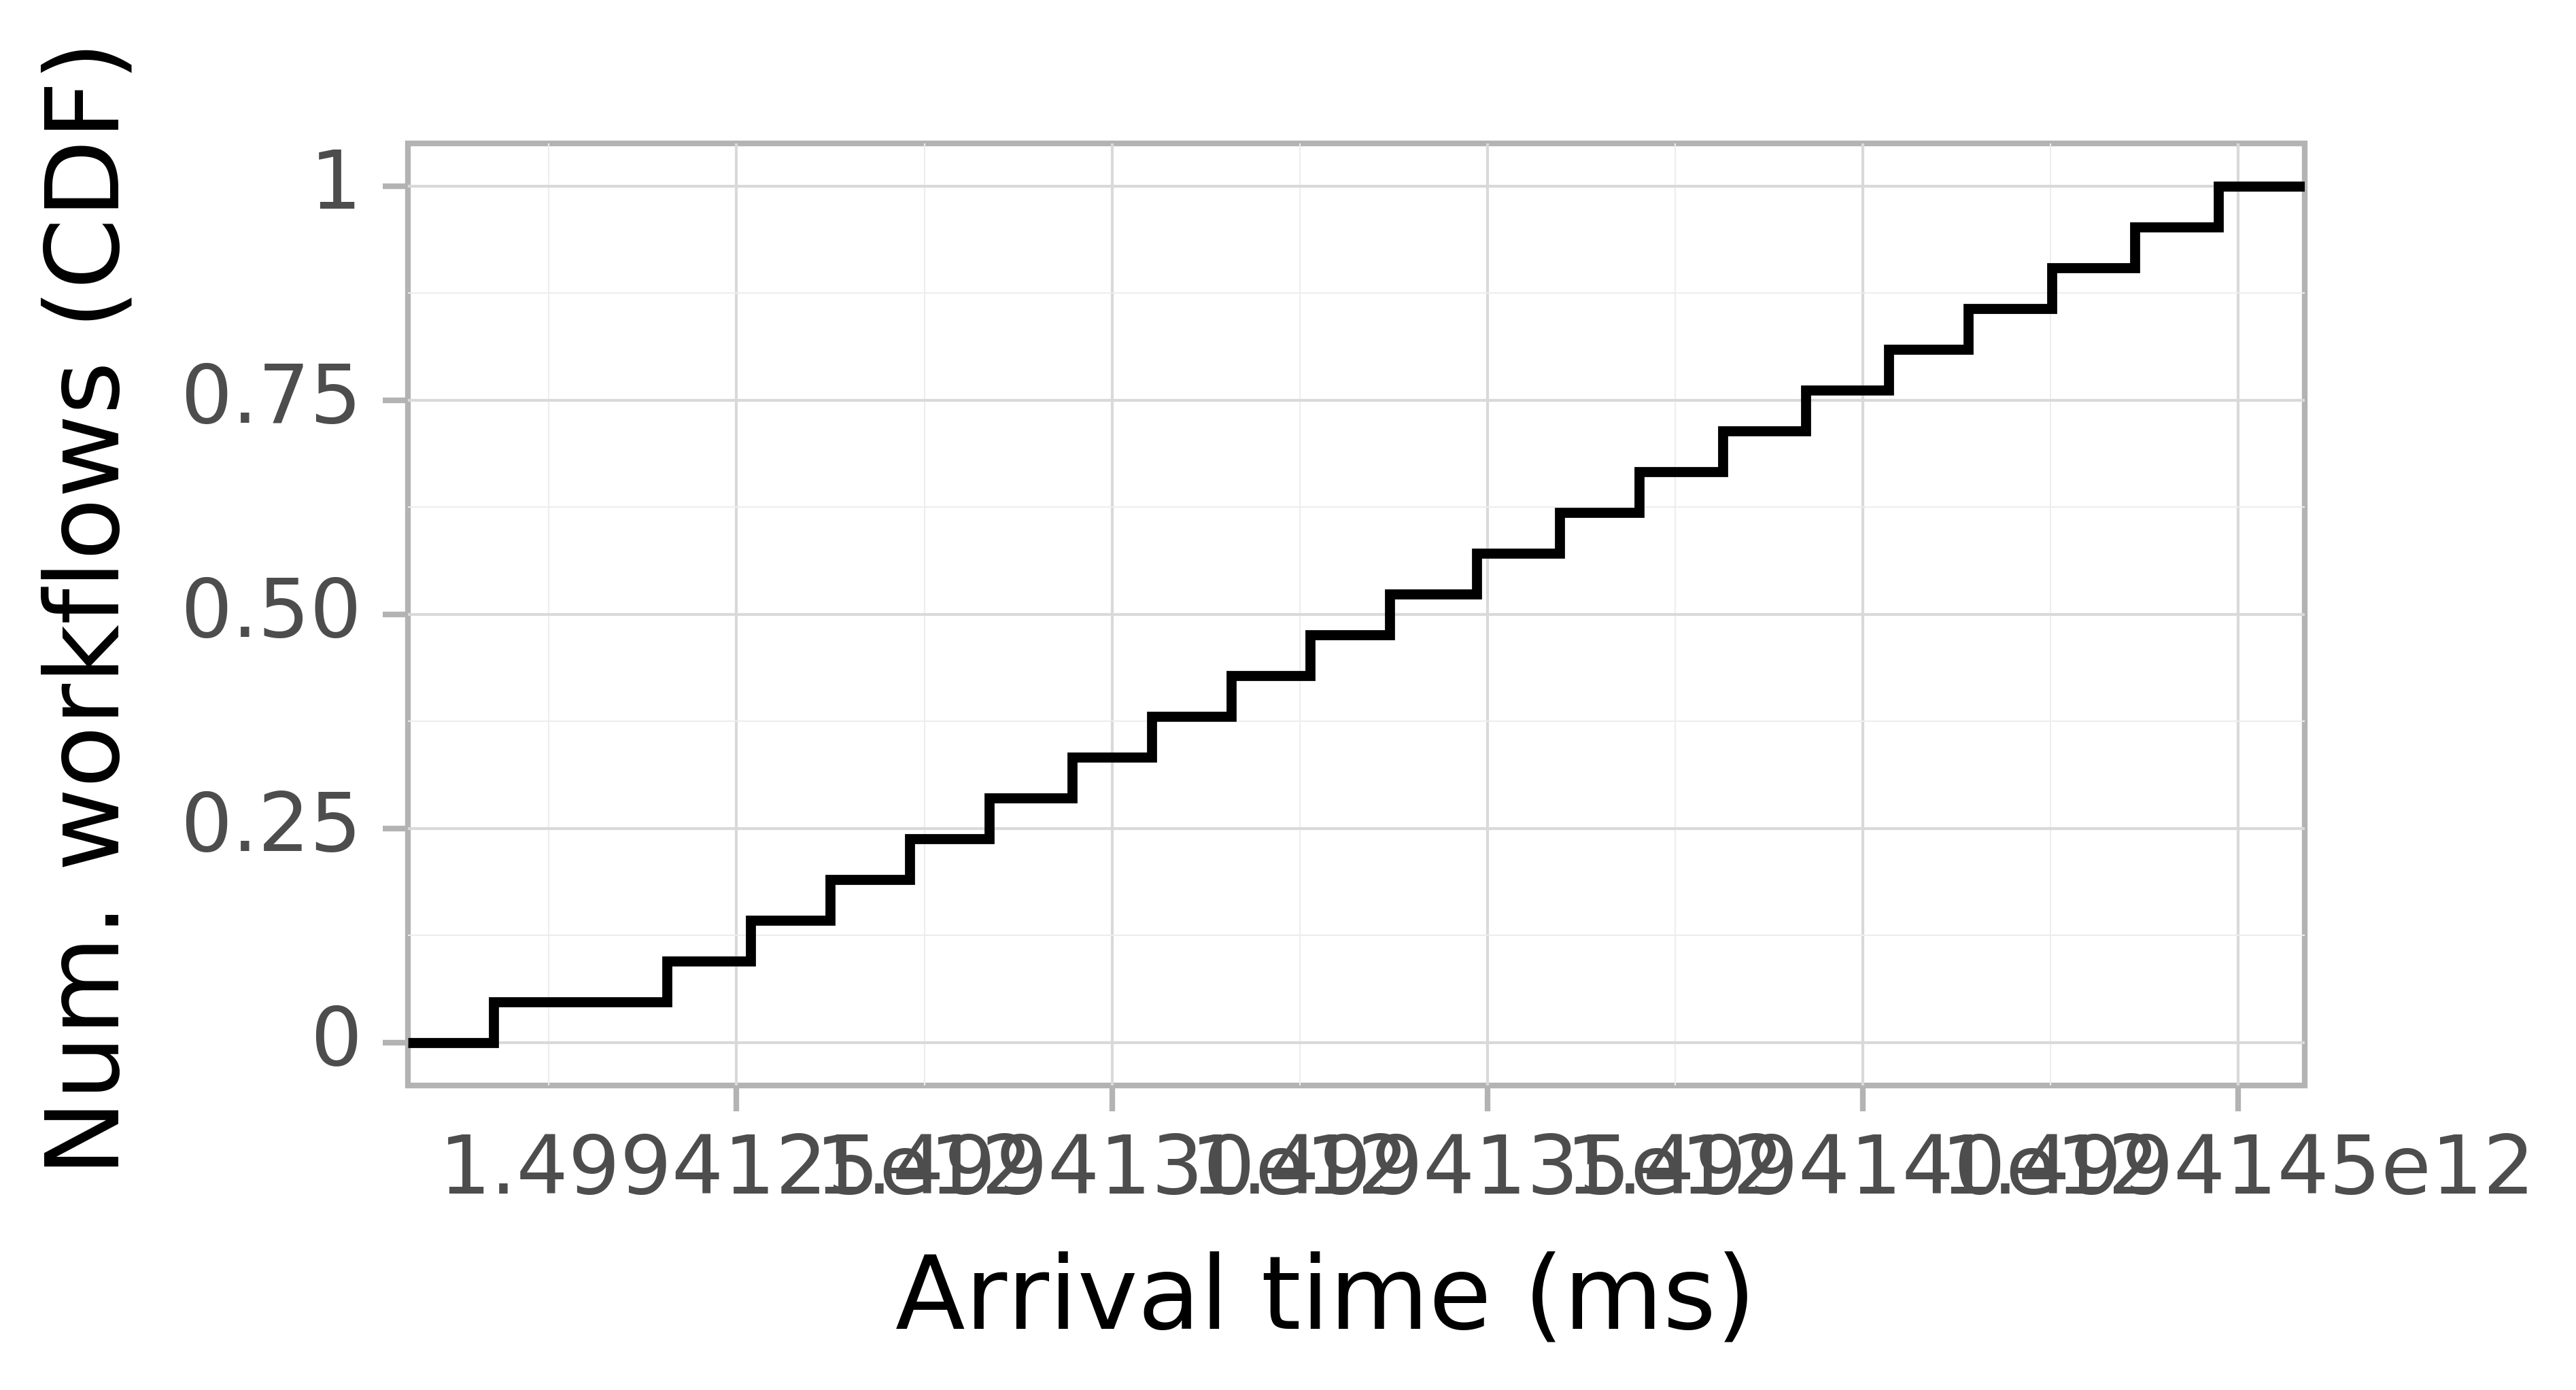 Job arrival CDF graph for the askalon-new_ee14 trace.